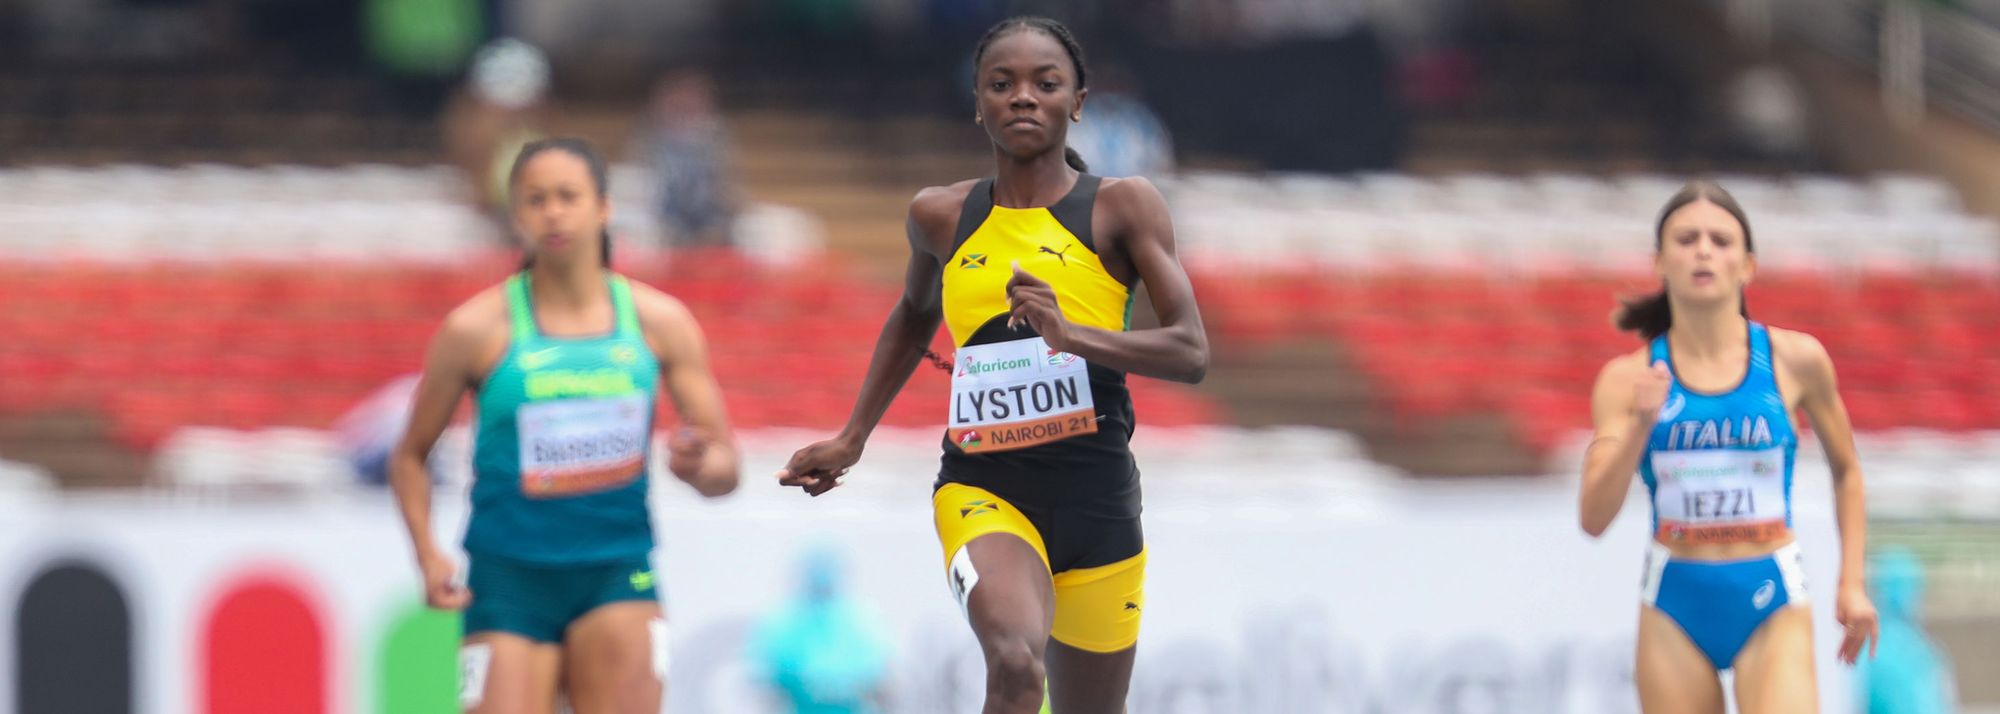 It was at an early age that a young sprinter from the parish of Saint Catherine in Jamaica garnered attention from around the world thanks to her eye-catching performances.